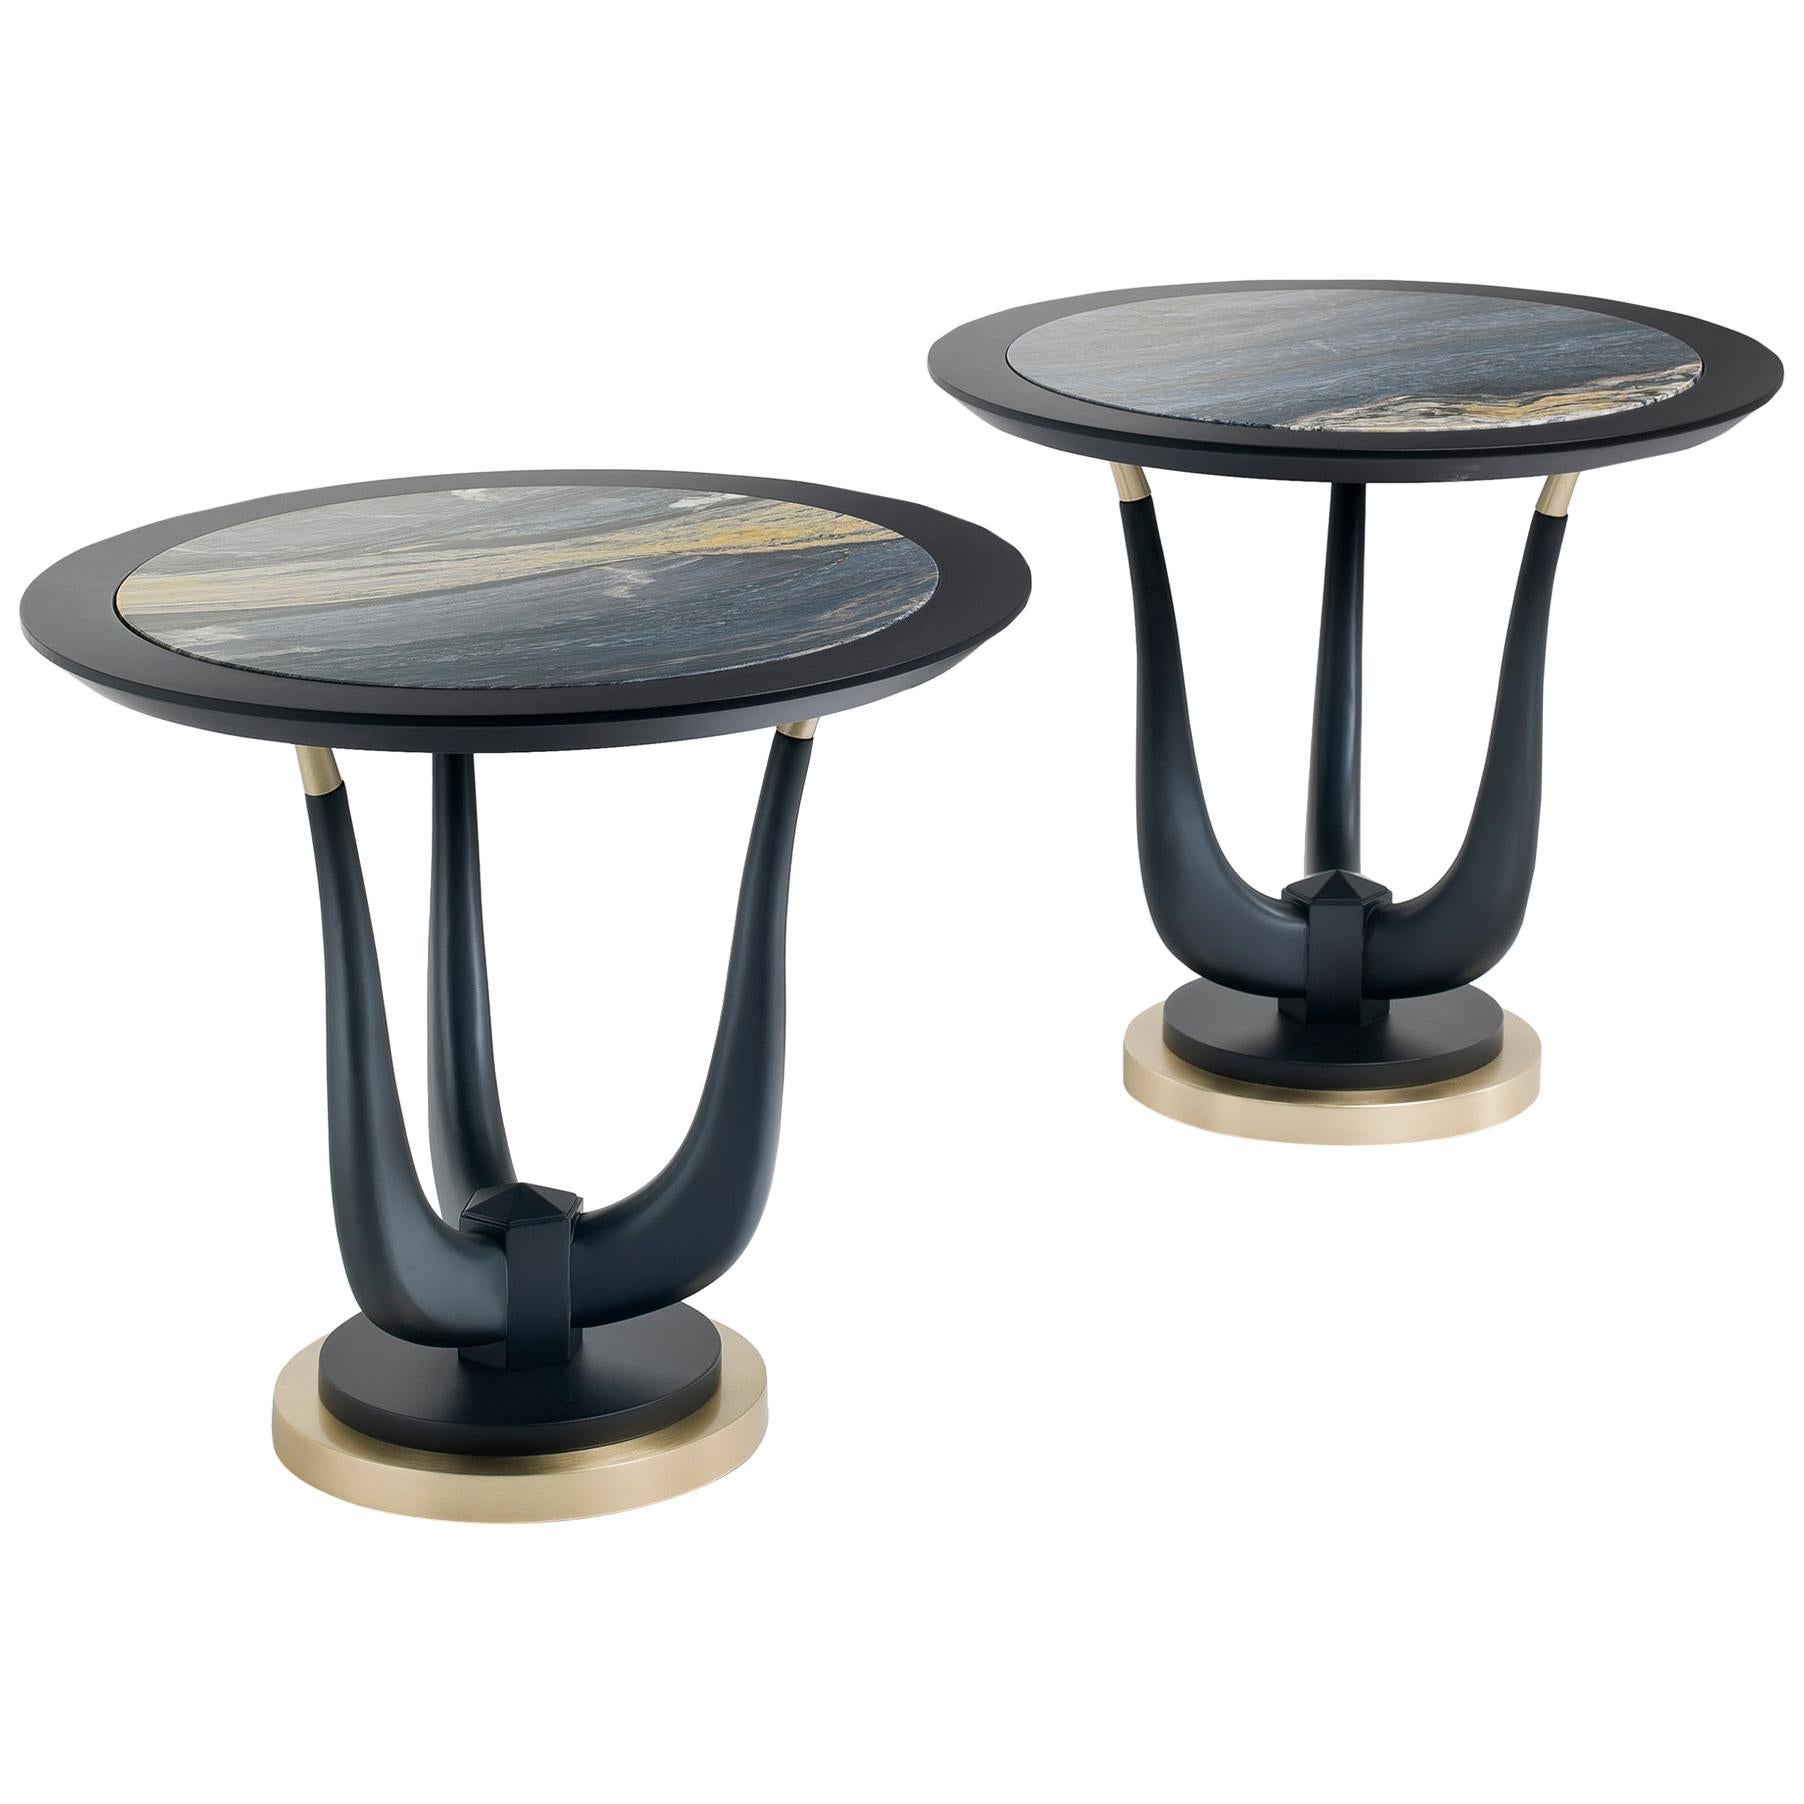 Poseidon Black Side Table in Matt Black Lacquered Finish and Blue Marble Top